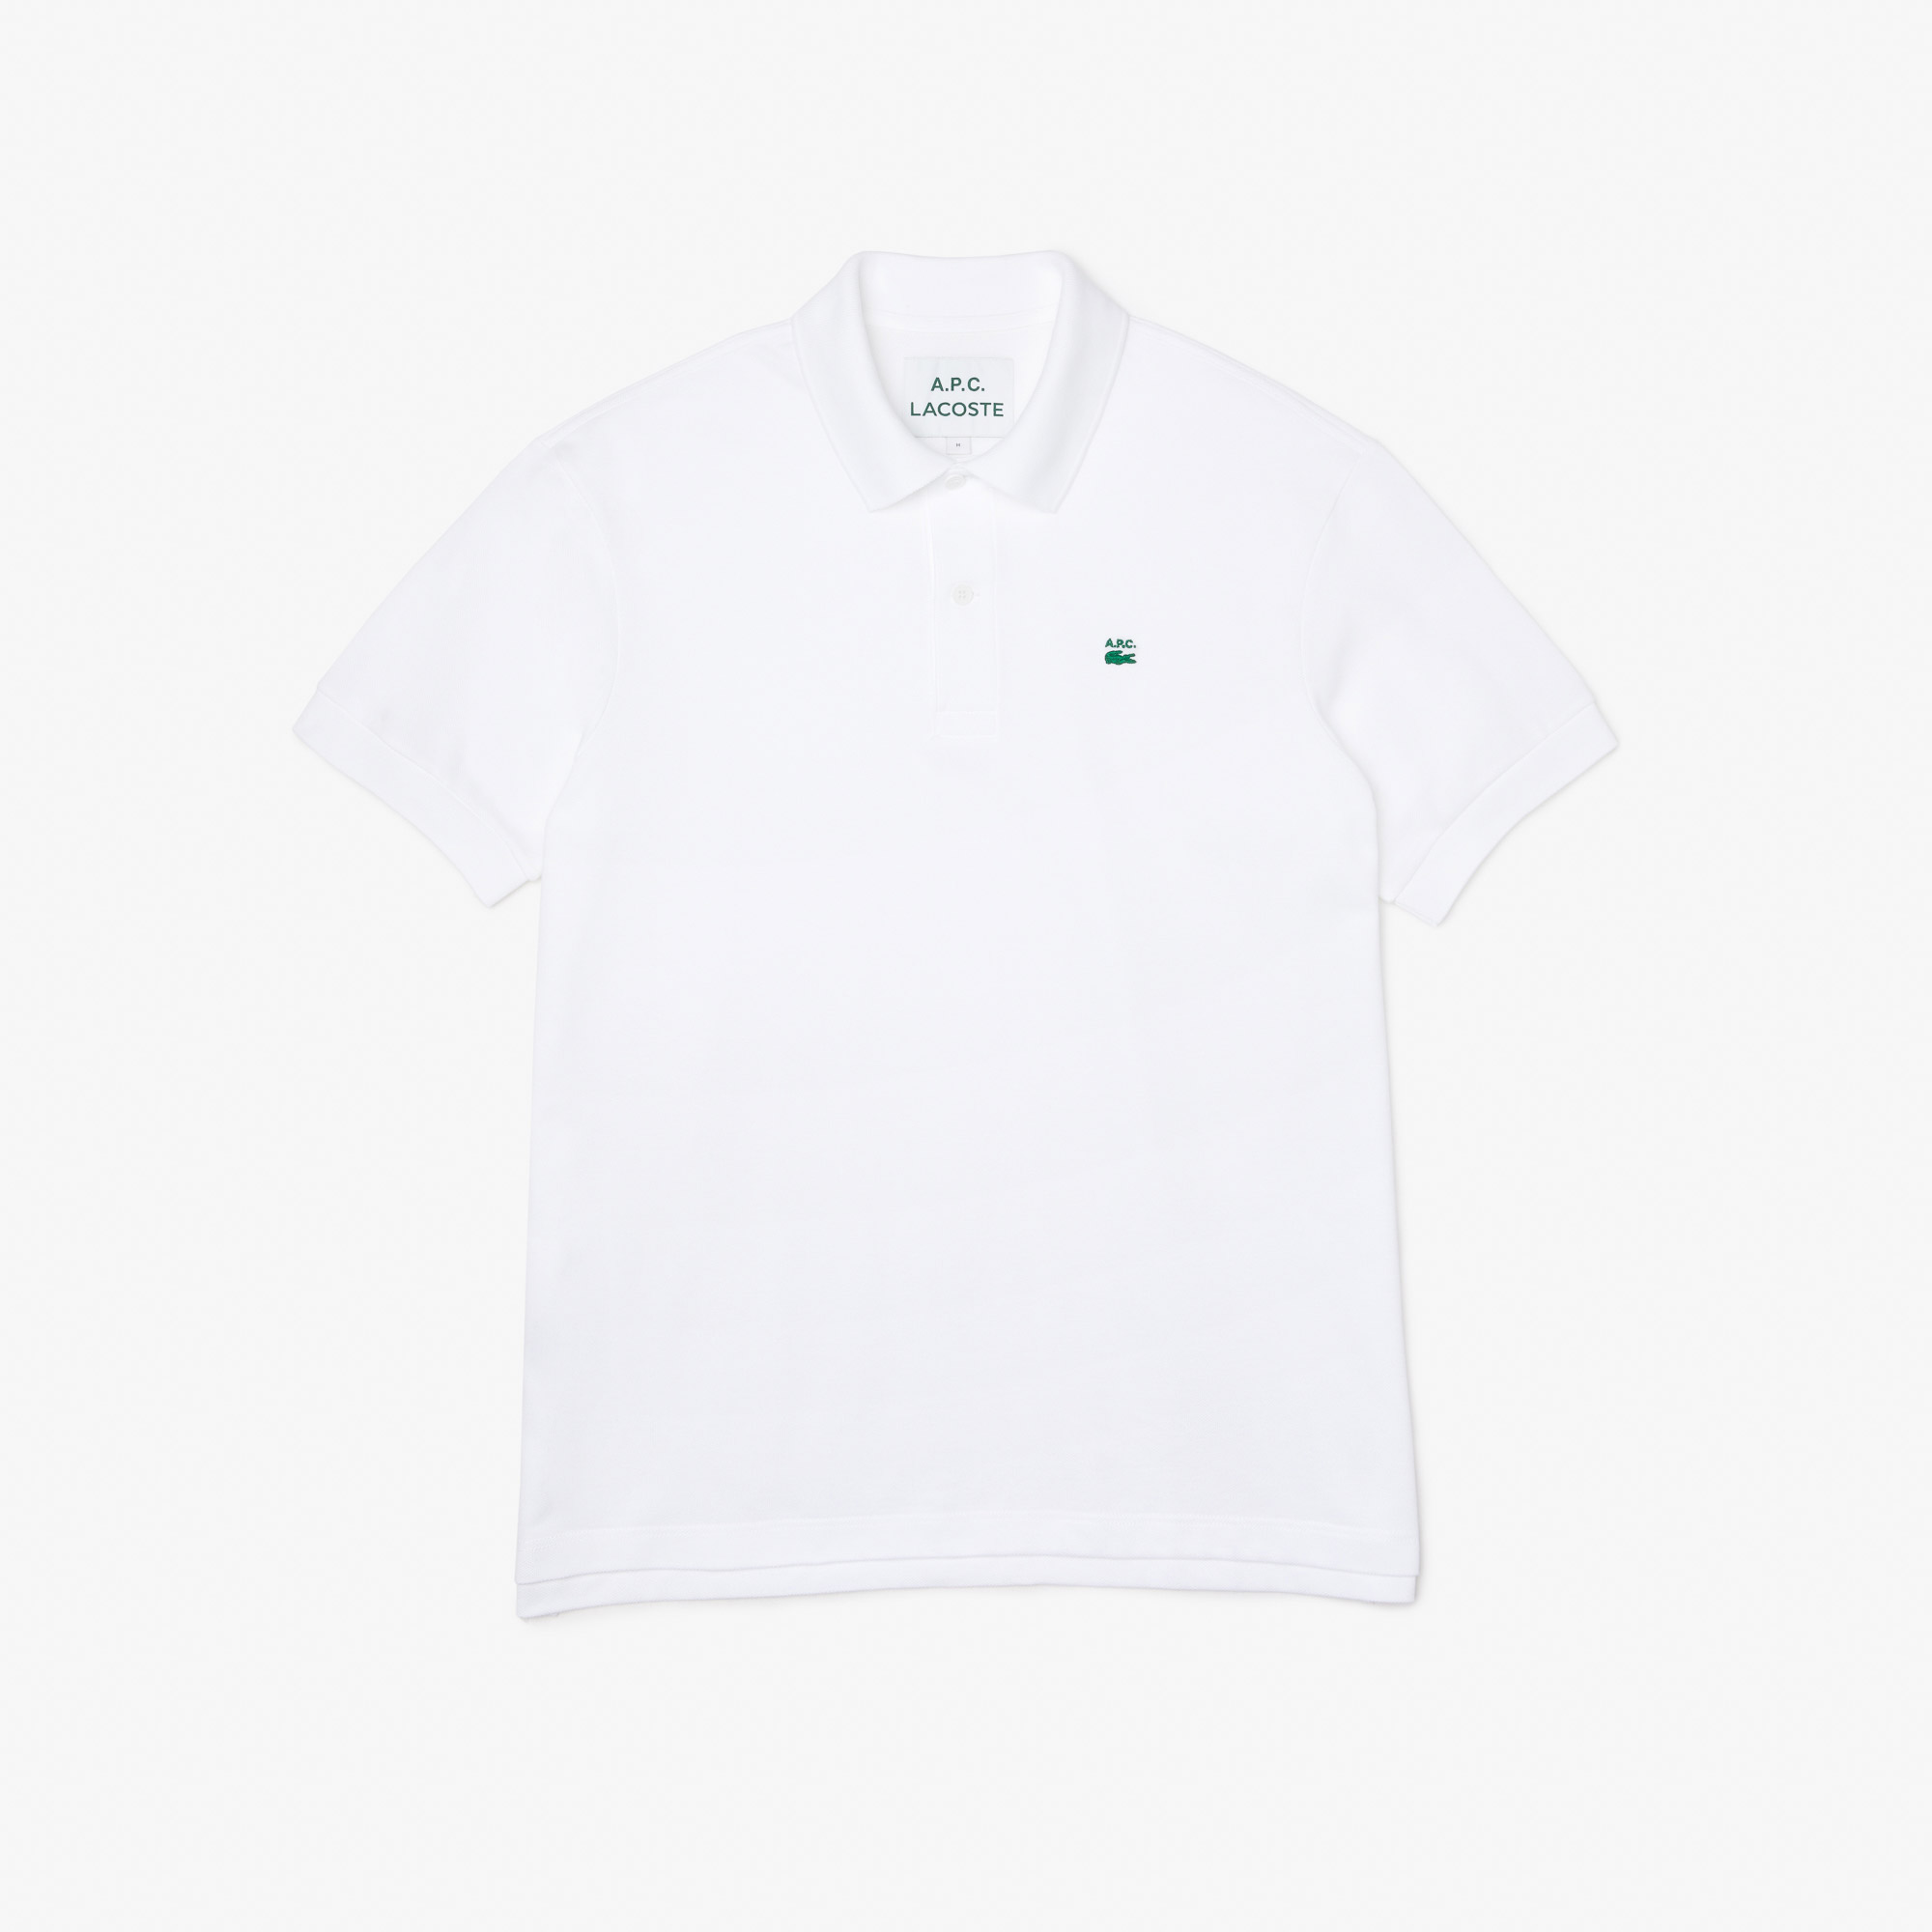 Lacoste X A.P.C Erkek Relaxed Fit Beyaz Polo. 1